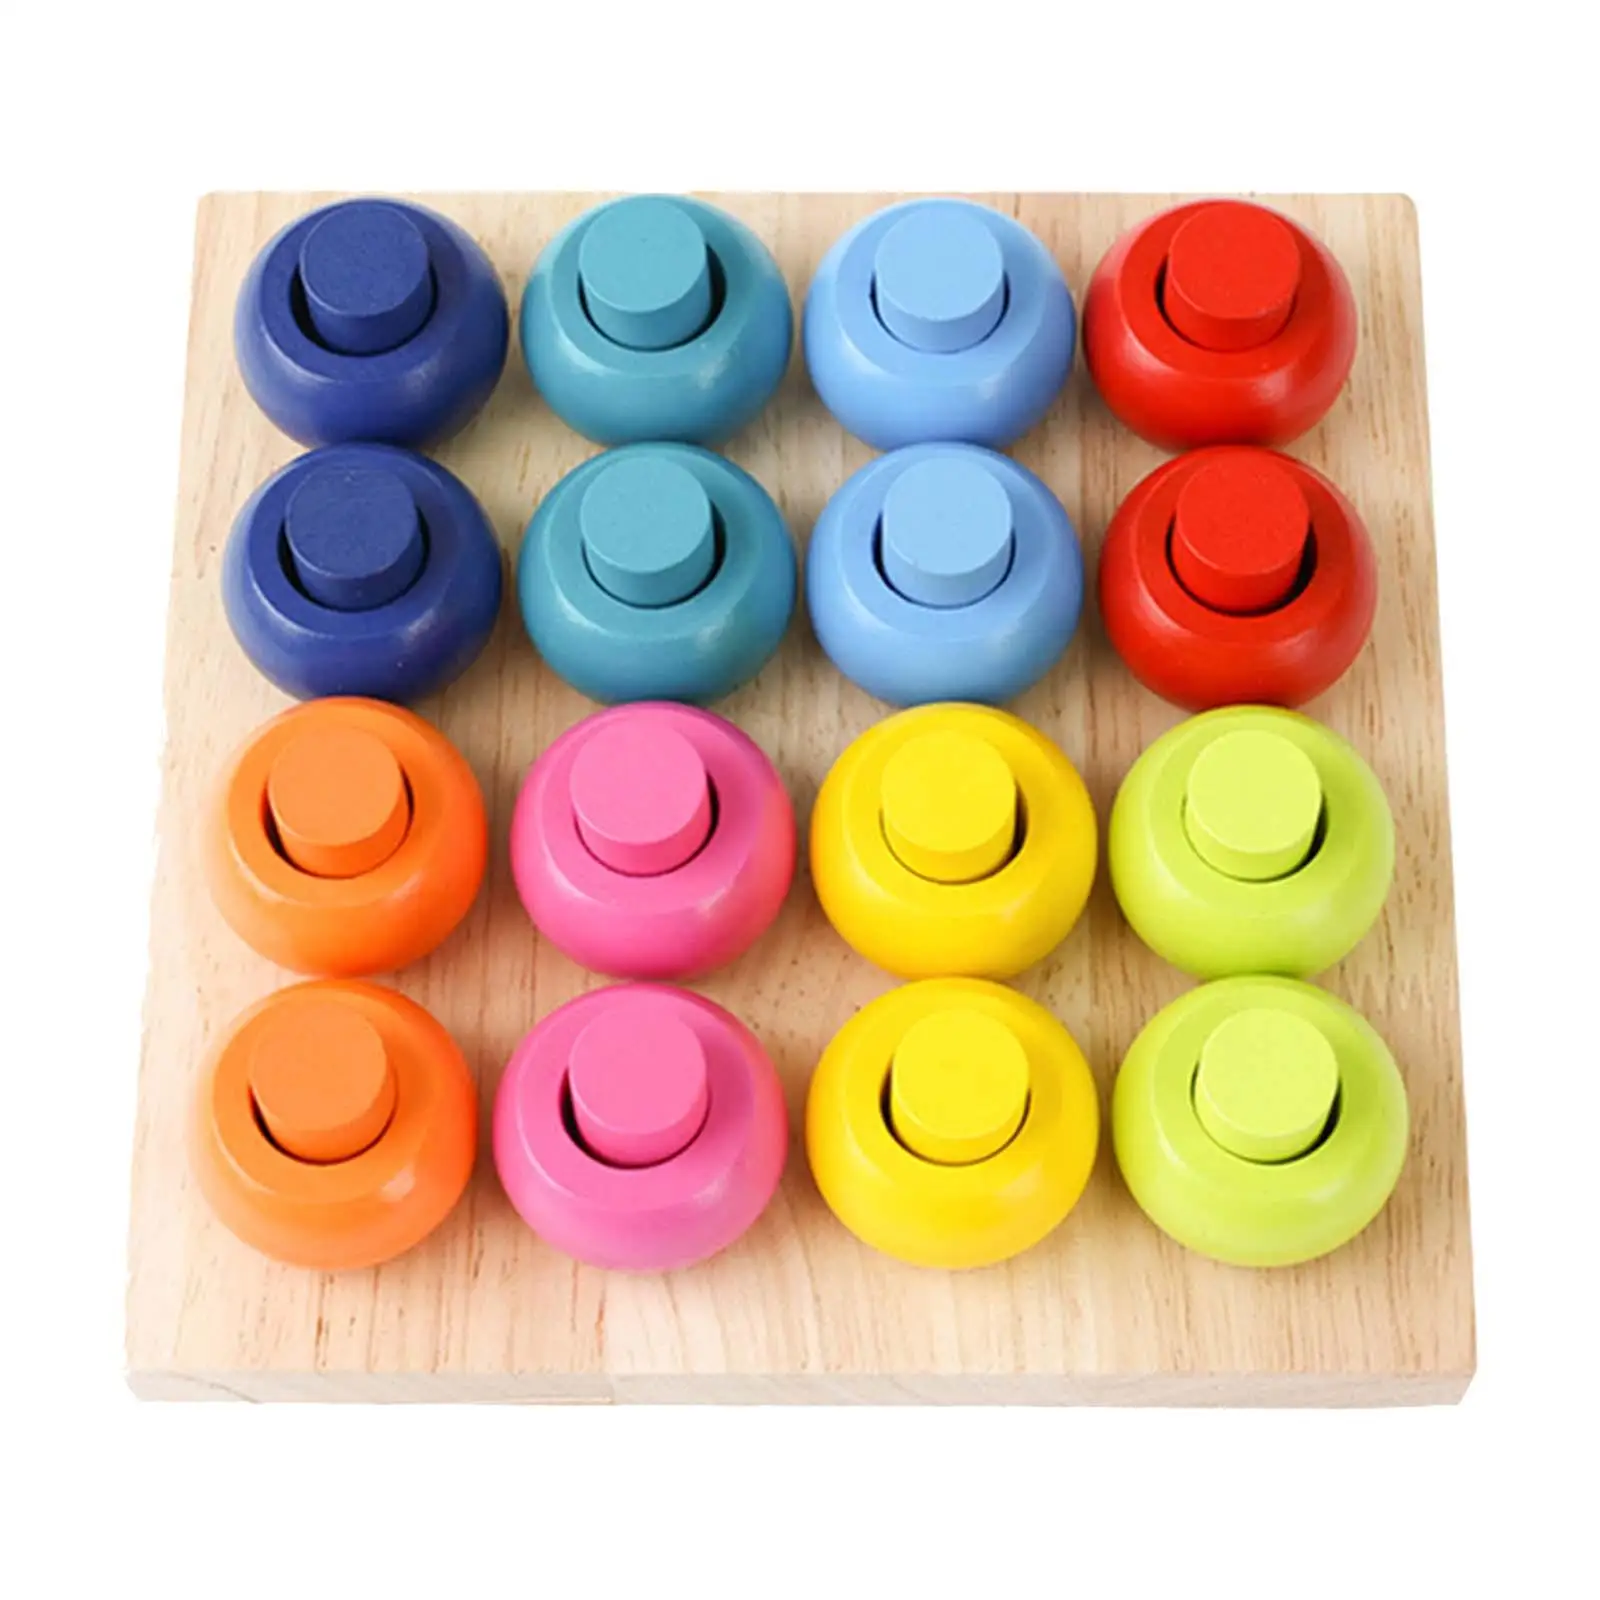 Wooden Stacking Peg Board Educational Wood Blocks Sorting Puzzle Sorter Stacker Colour Sorting Puzzle for Kids Early Education